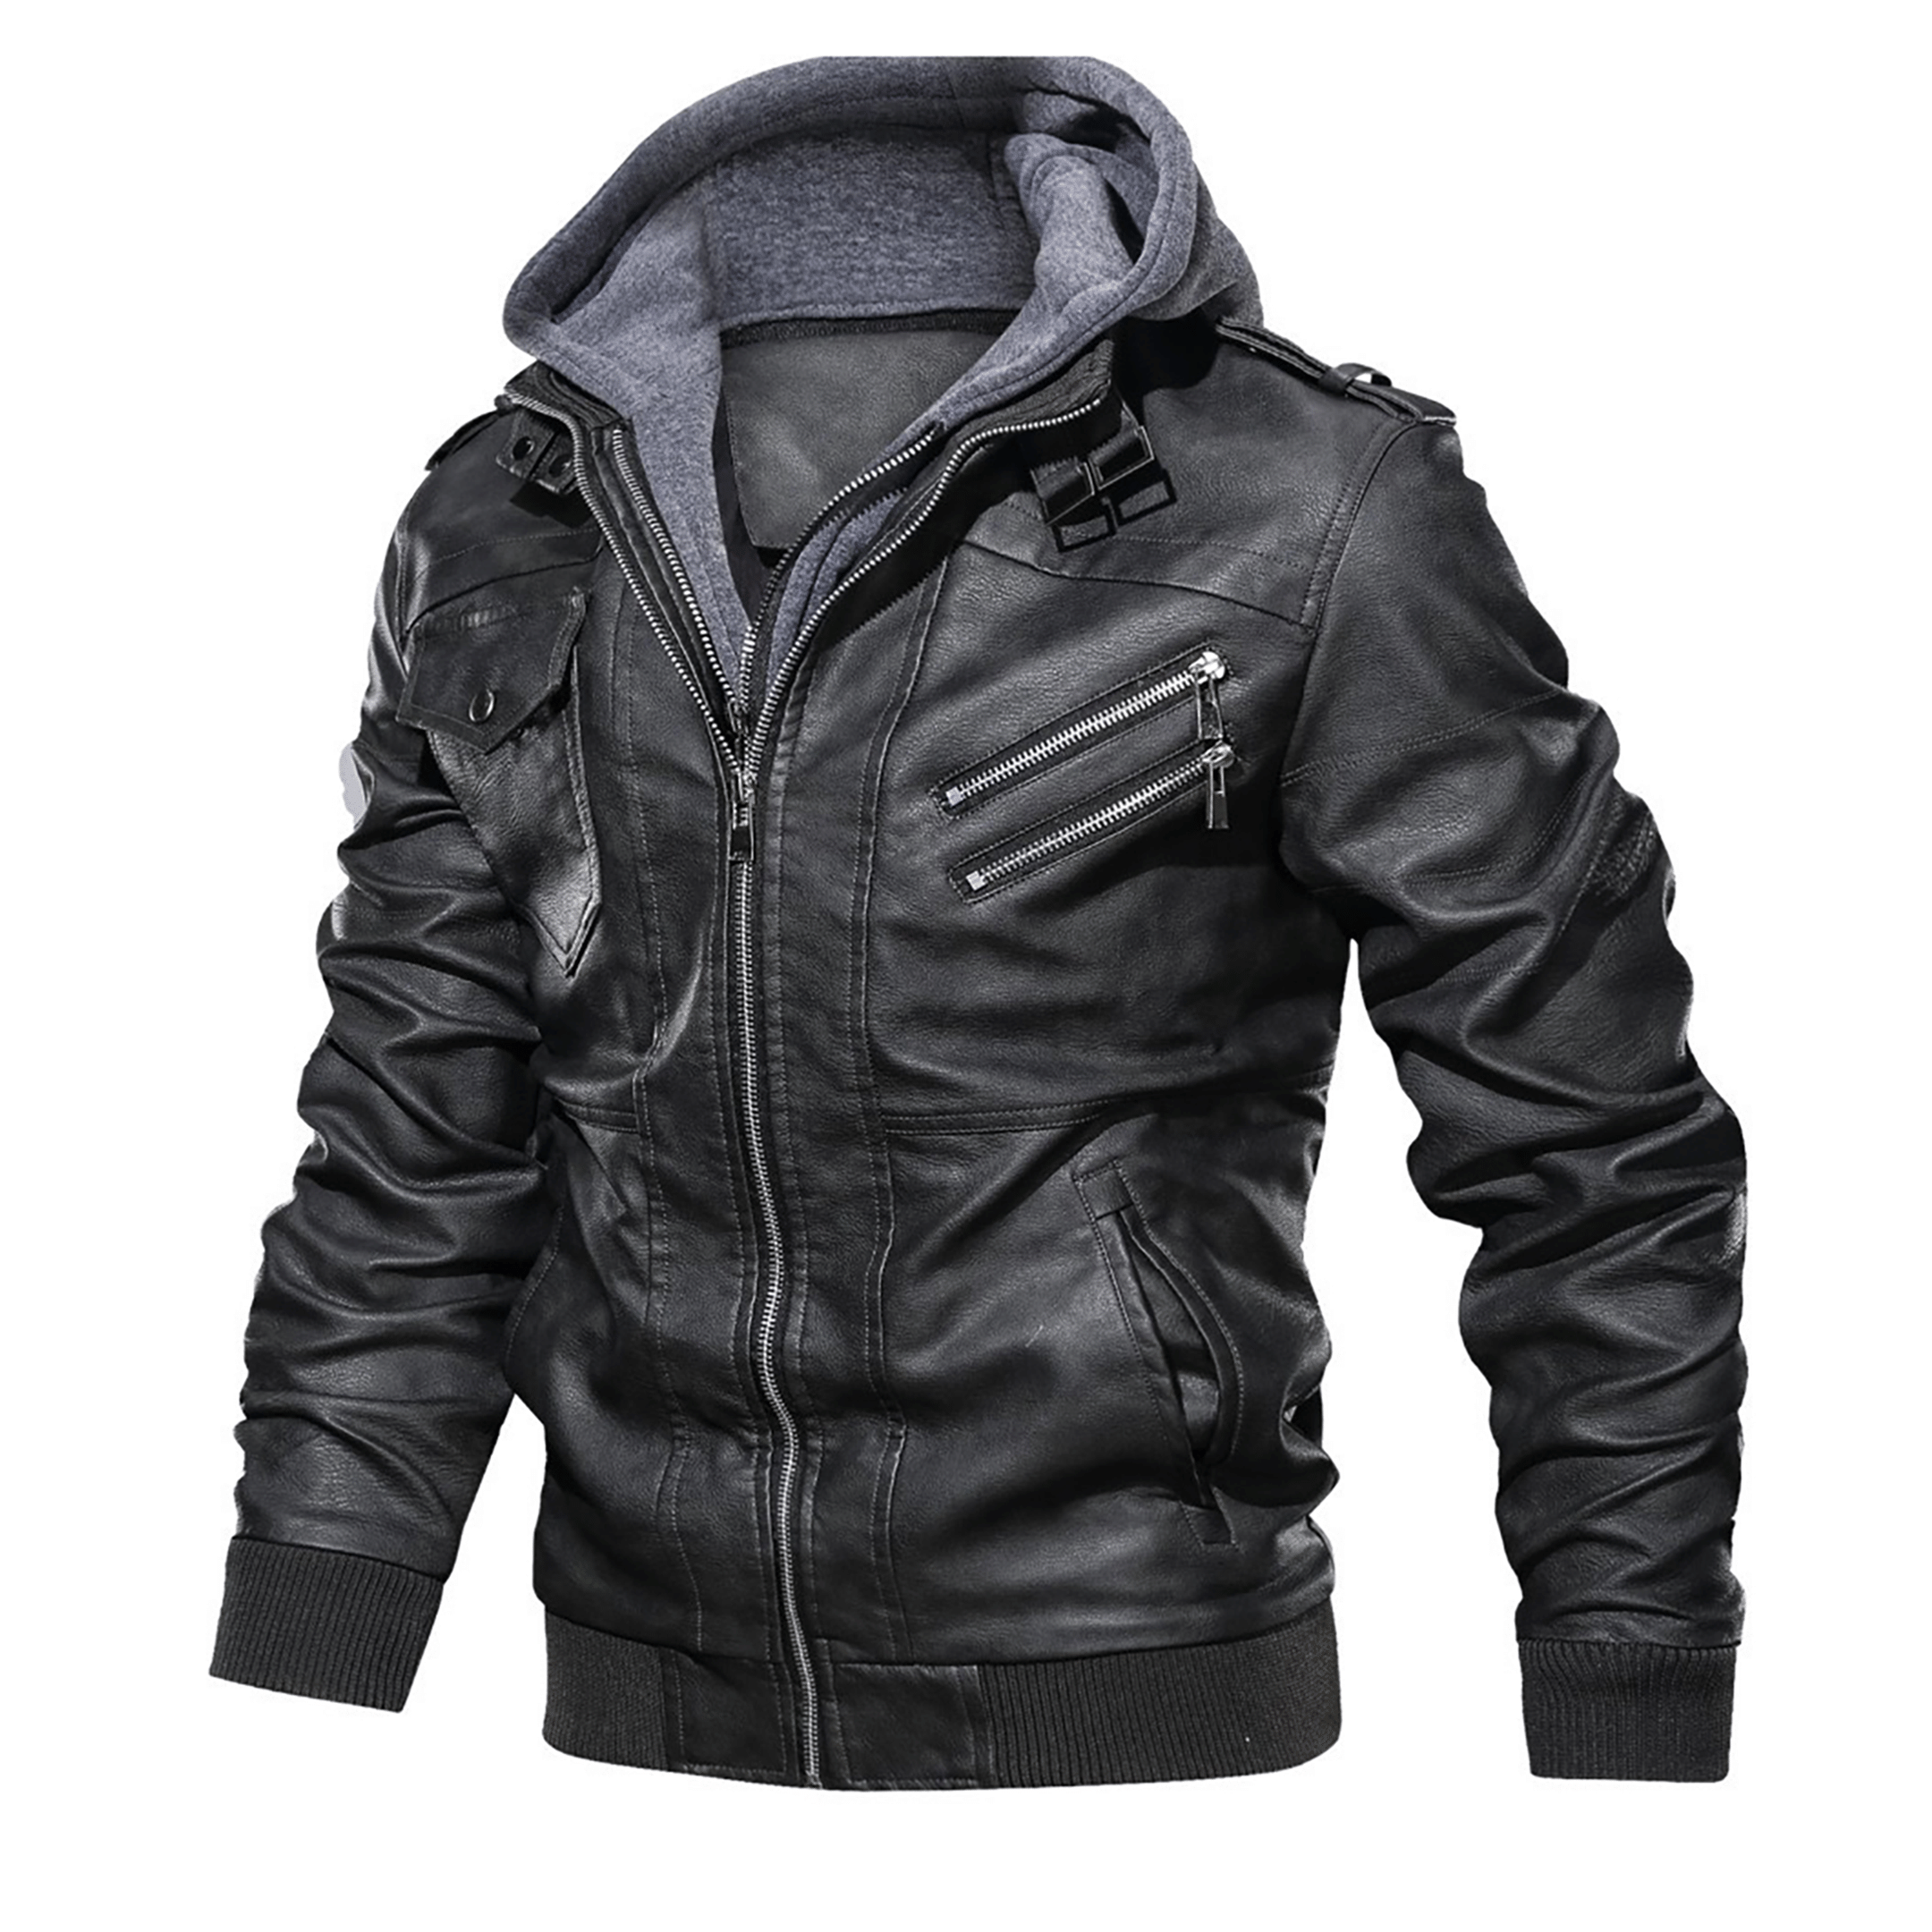 Top leather jackets and latest products 437